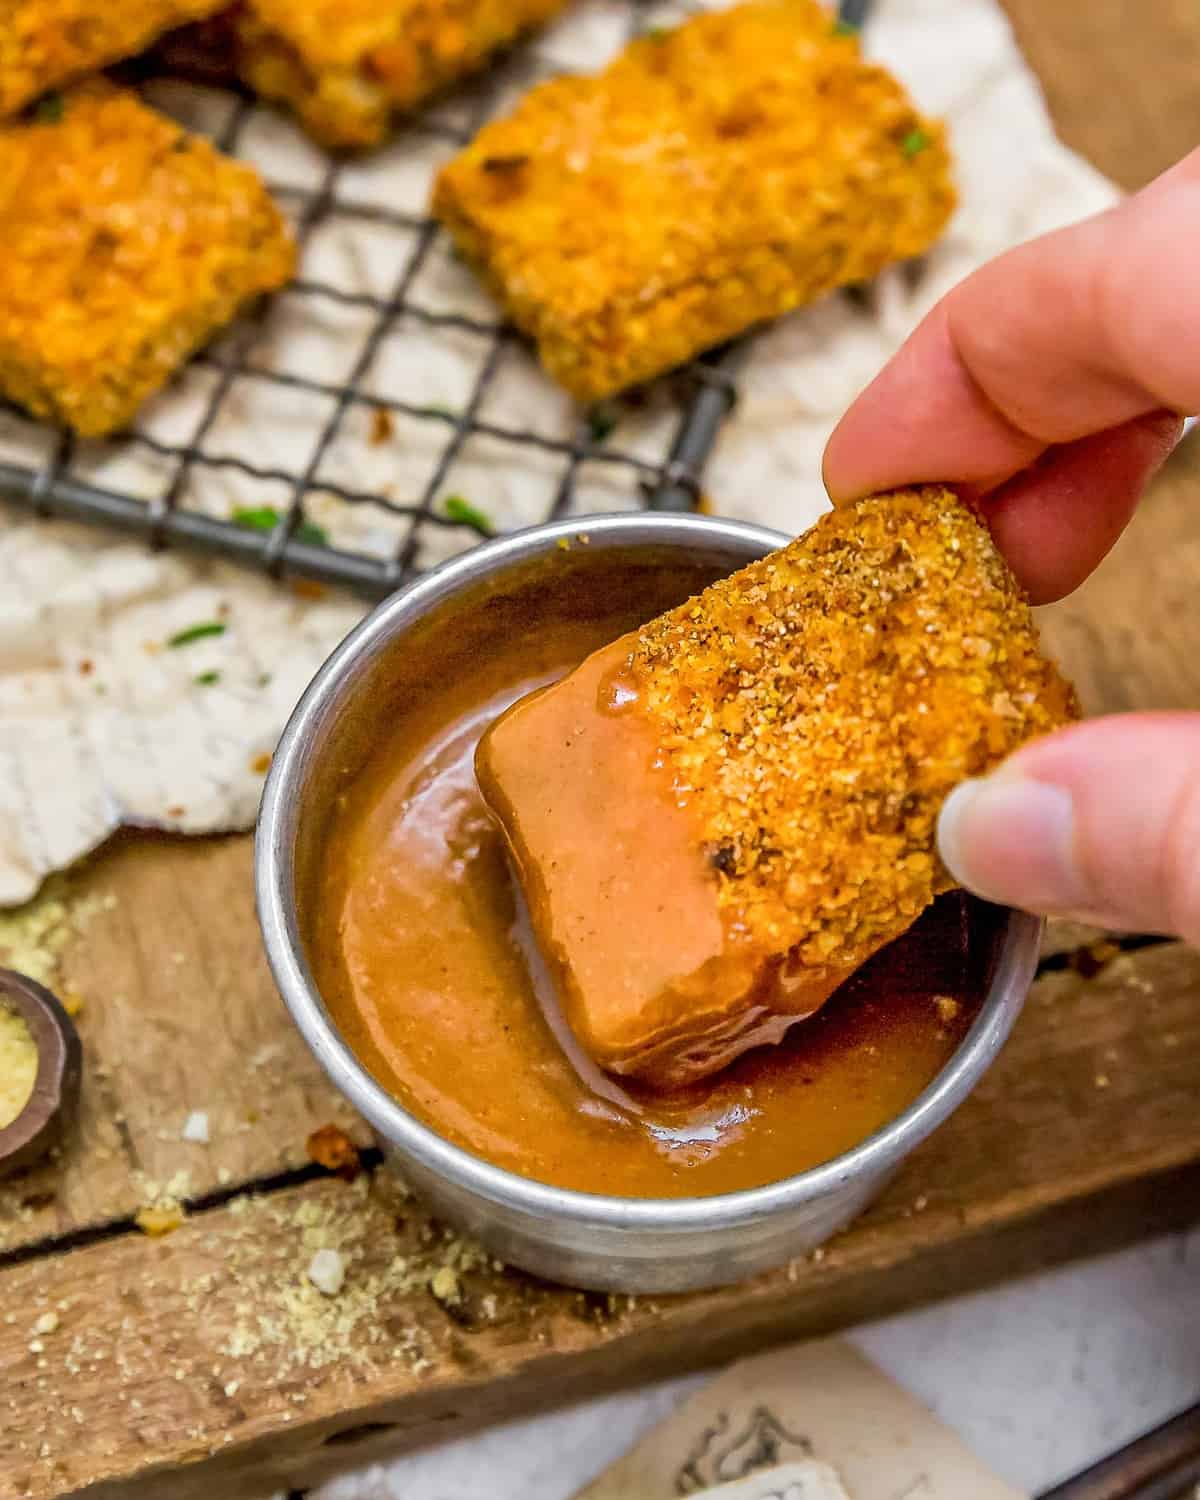 Dipping Crispy Baked Tofu Nugget in Maple Mustard Dipping Sauce